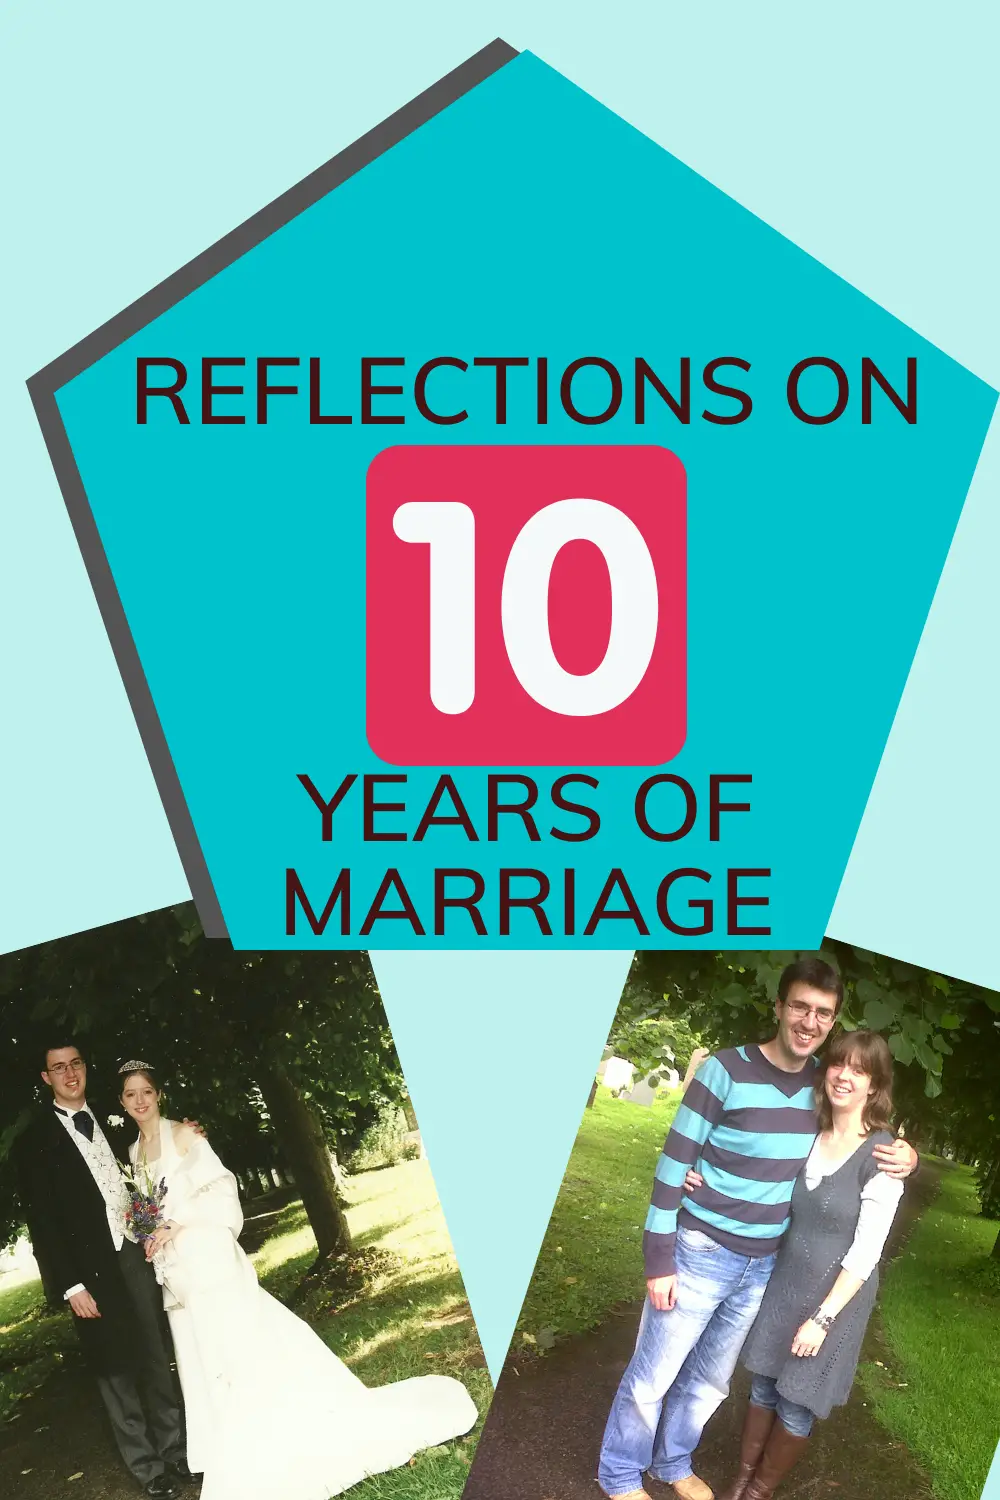 Reflections on 10 years of marriage. How do you sustain and grow a marriage relationship over time?